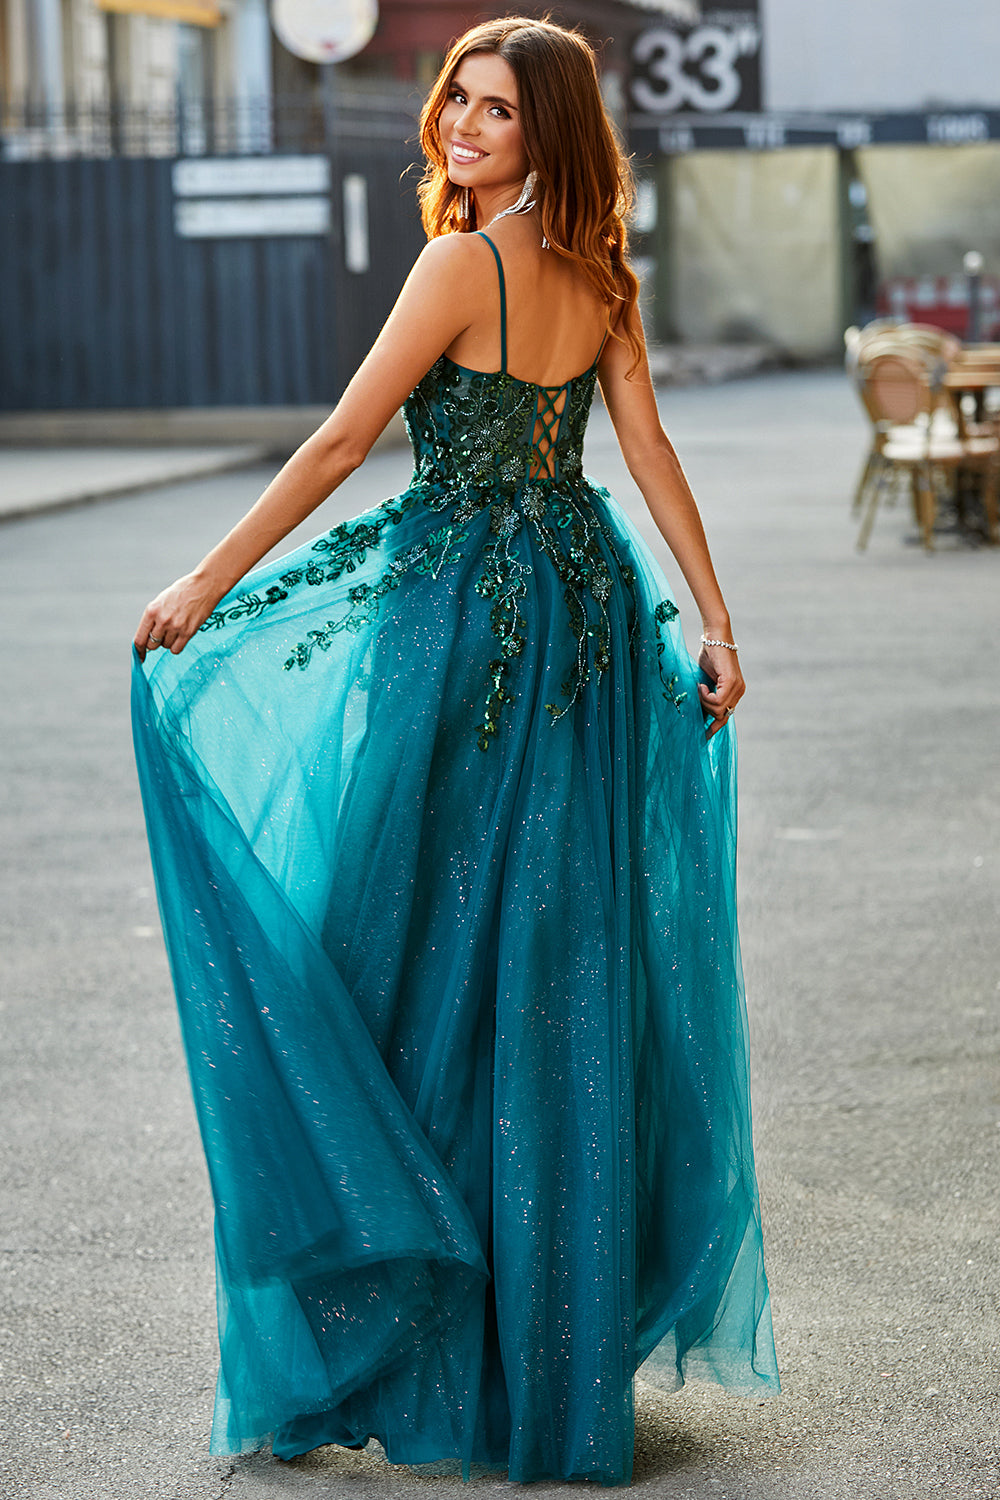 Dark Green Spaghetti Straps A Line Long Appliqued Prom Dress With Slit